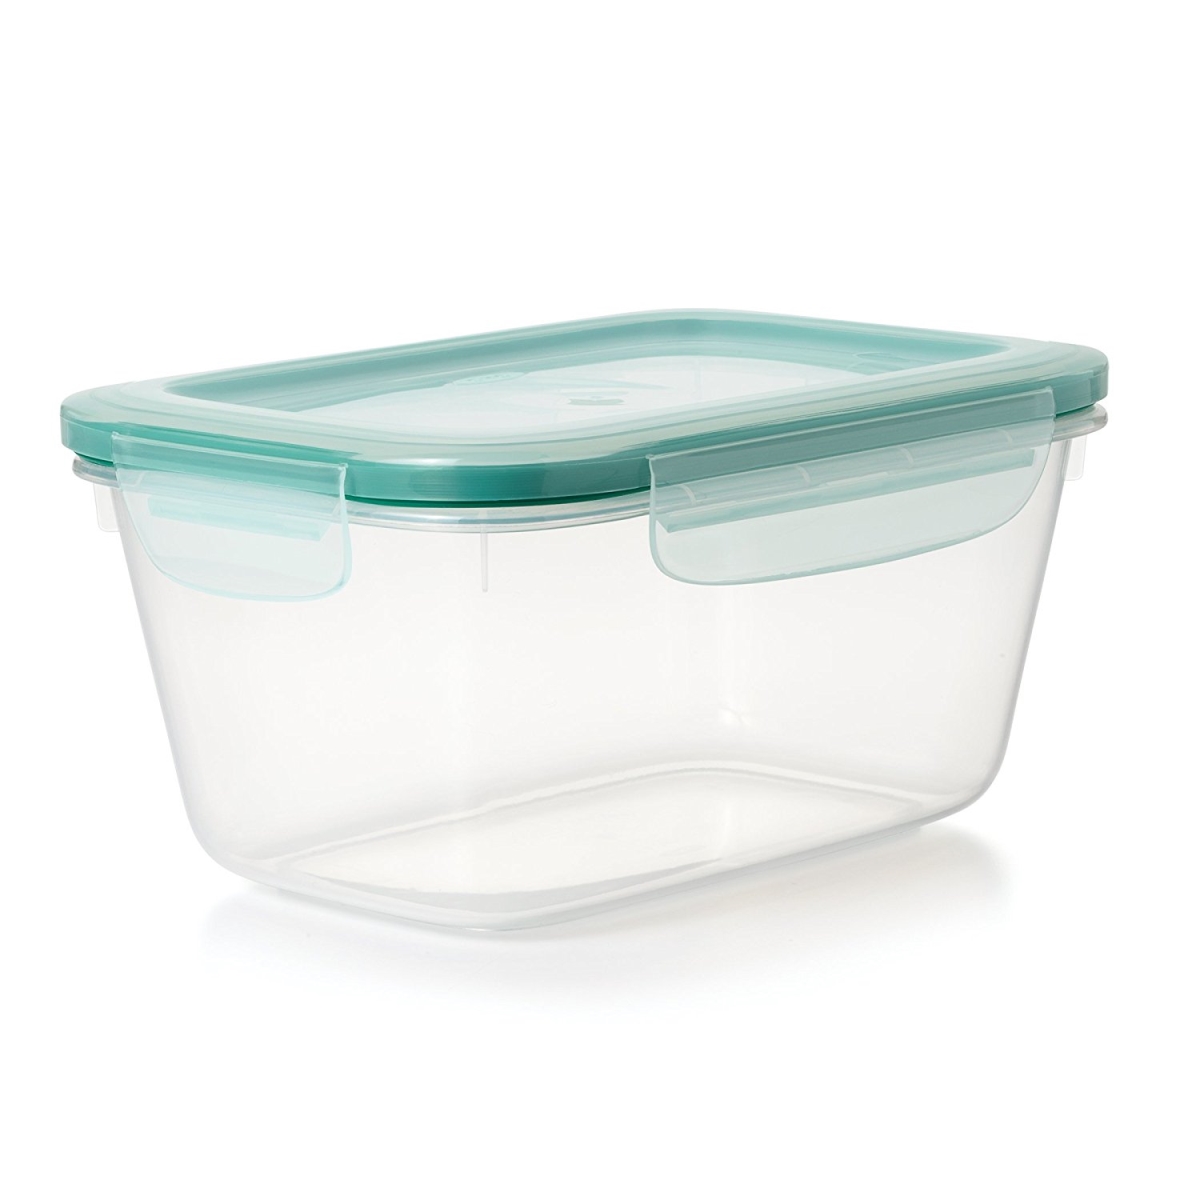 International 228103 9.6 Cup Snap Leakproof Food Storage Container